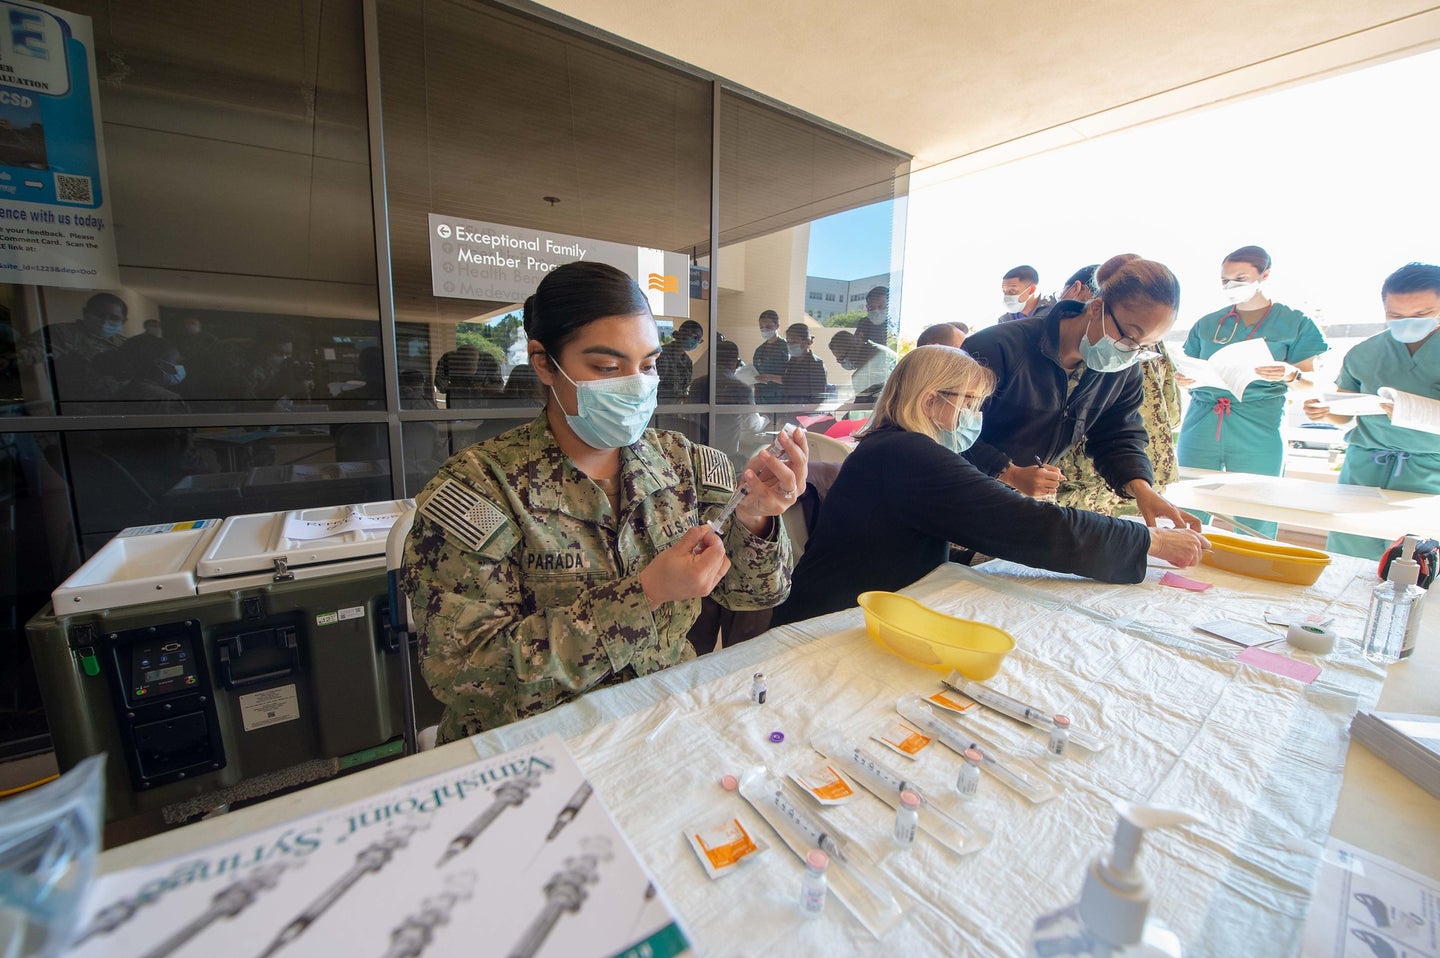 A US sailor at the Naval Medical Center in San Diego, California, prepares Pfizer COVID-19 vaccines for rollout